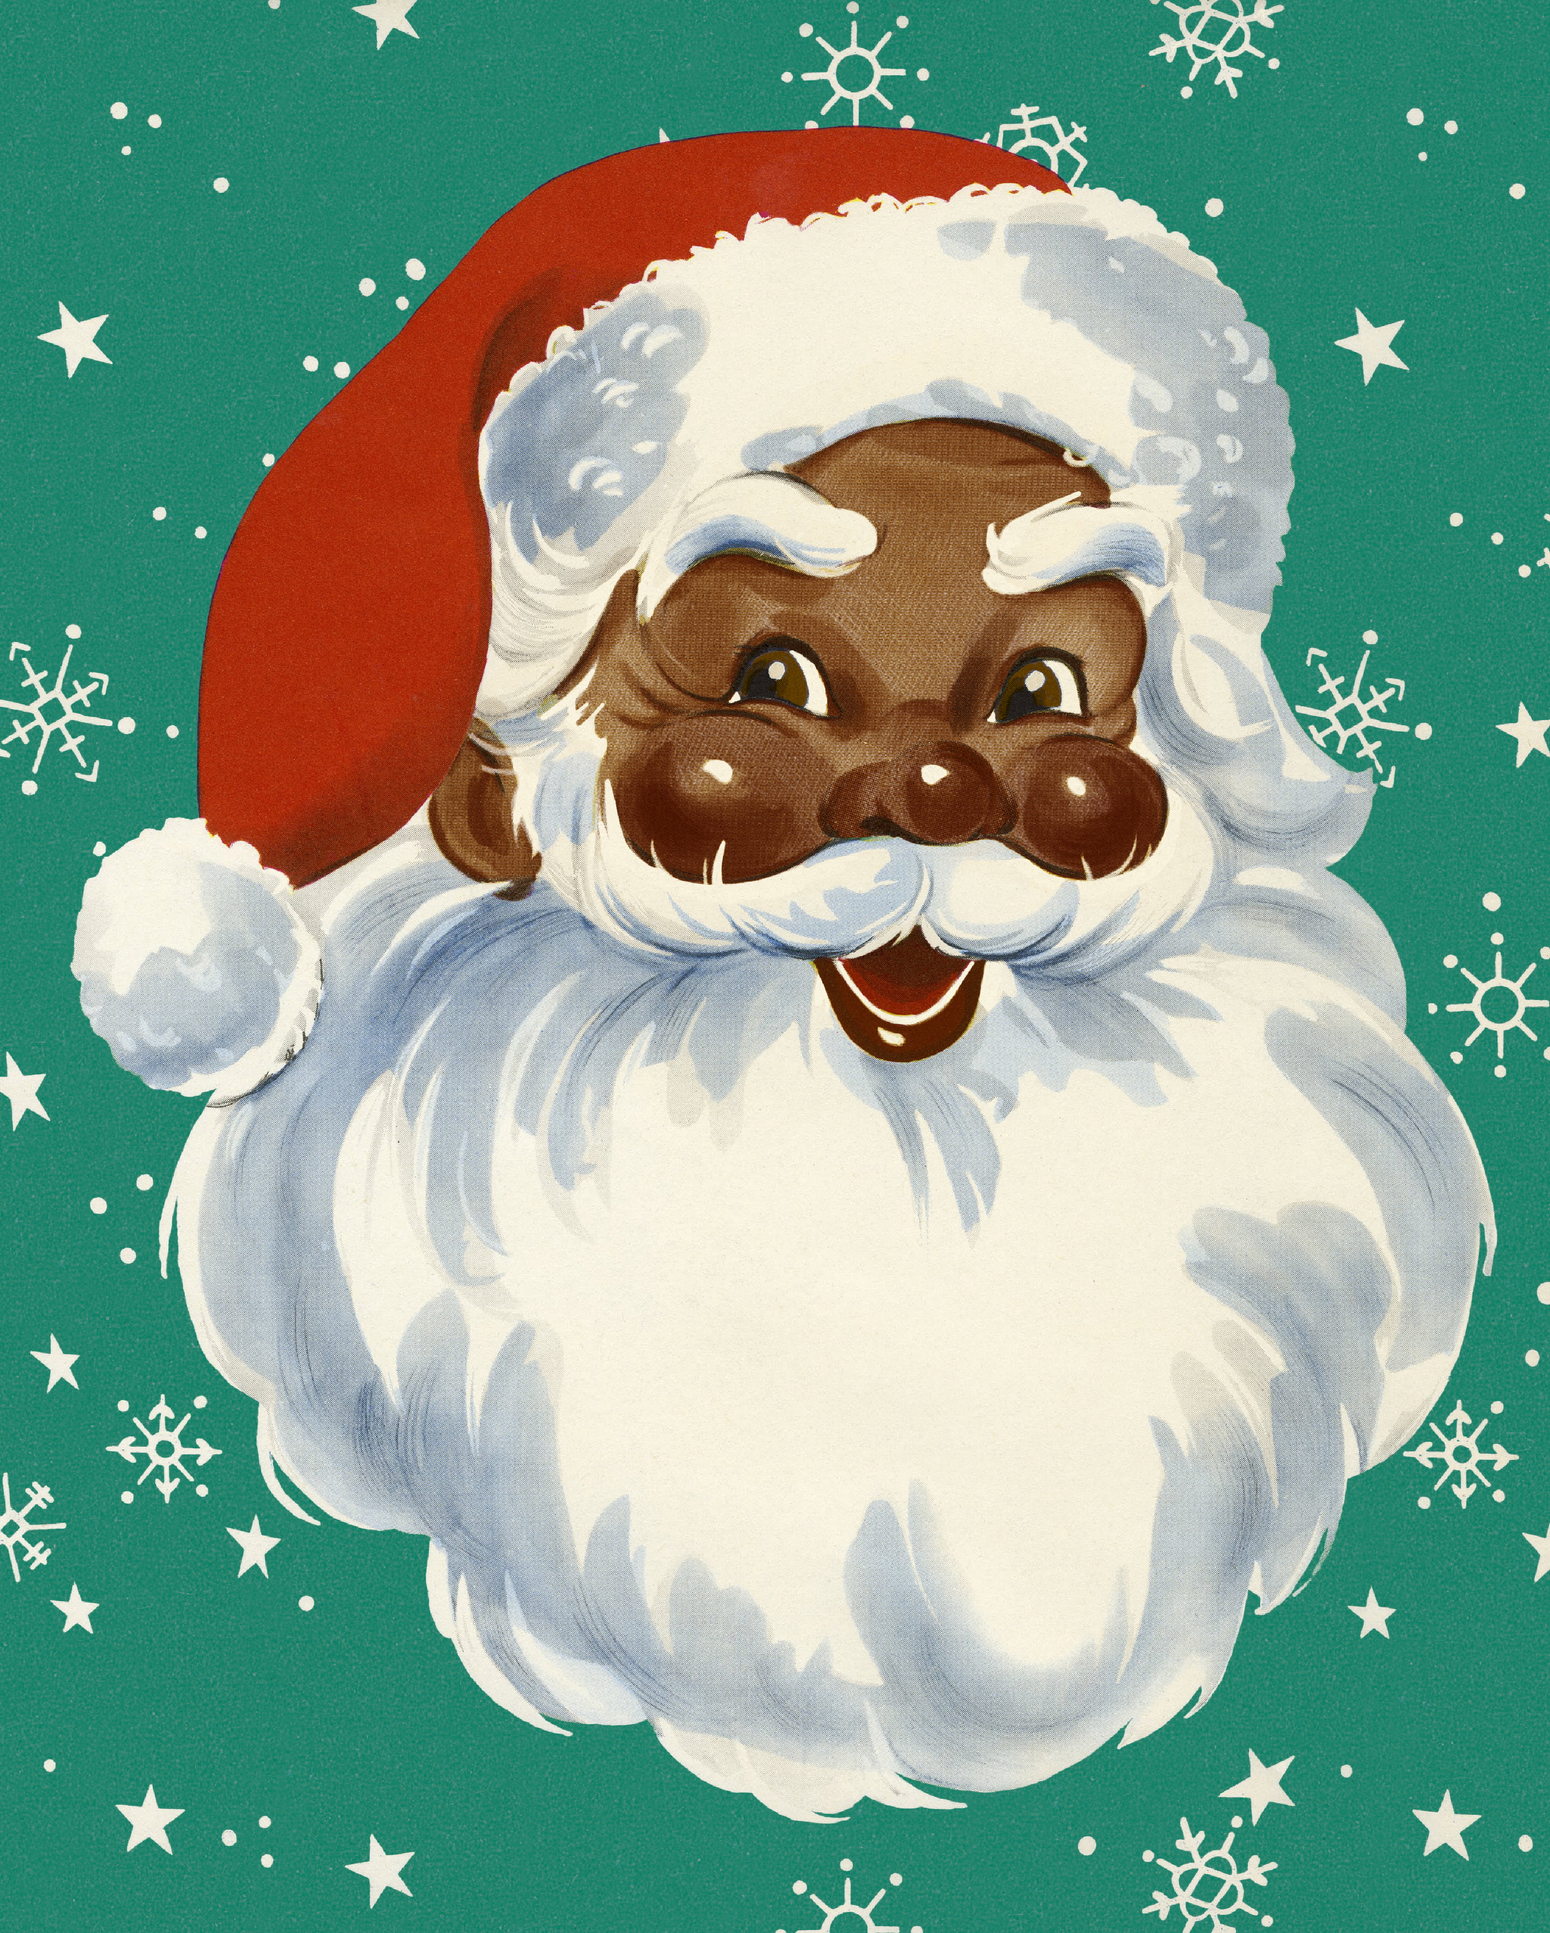 The Bookseller  Comment  Why we chose Black Santa